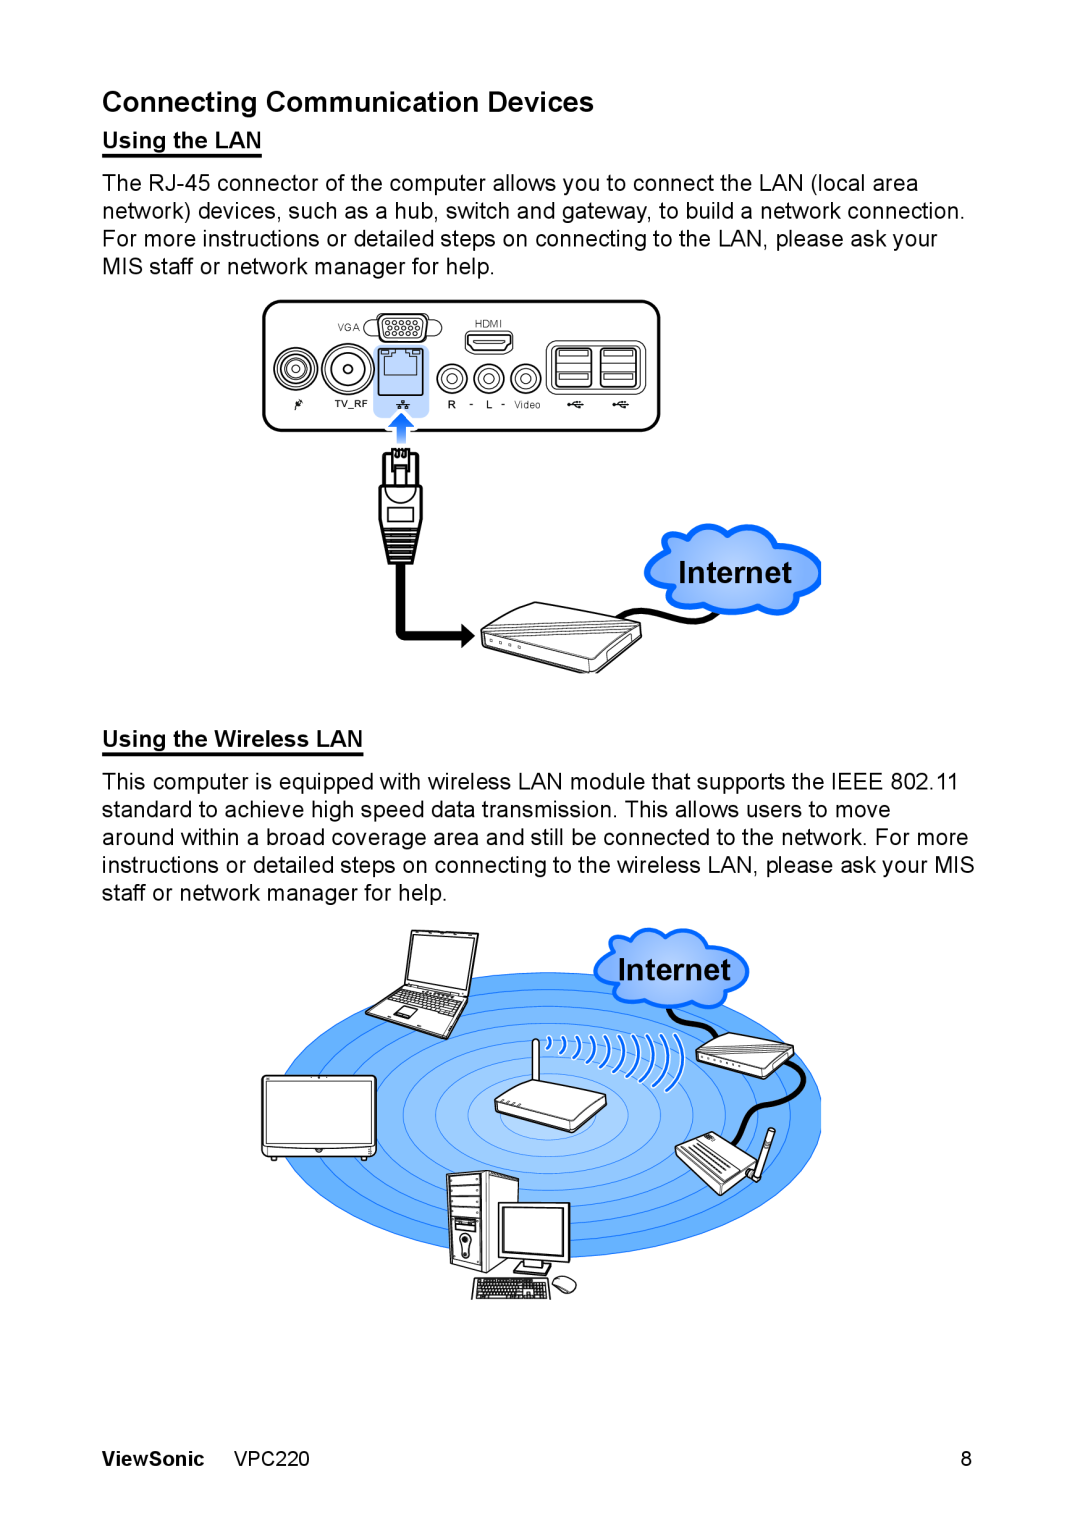 ViewSonic VS13426 manual Internet, Connecting Communication Devices, Using the LAN, Using the Wireless LAN 